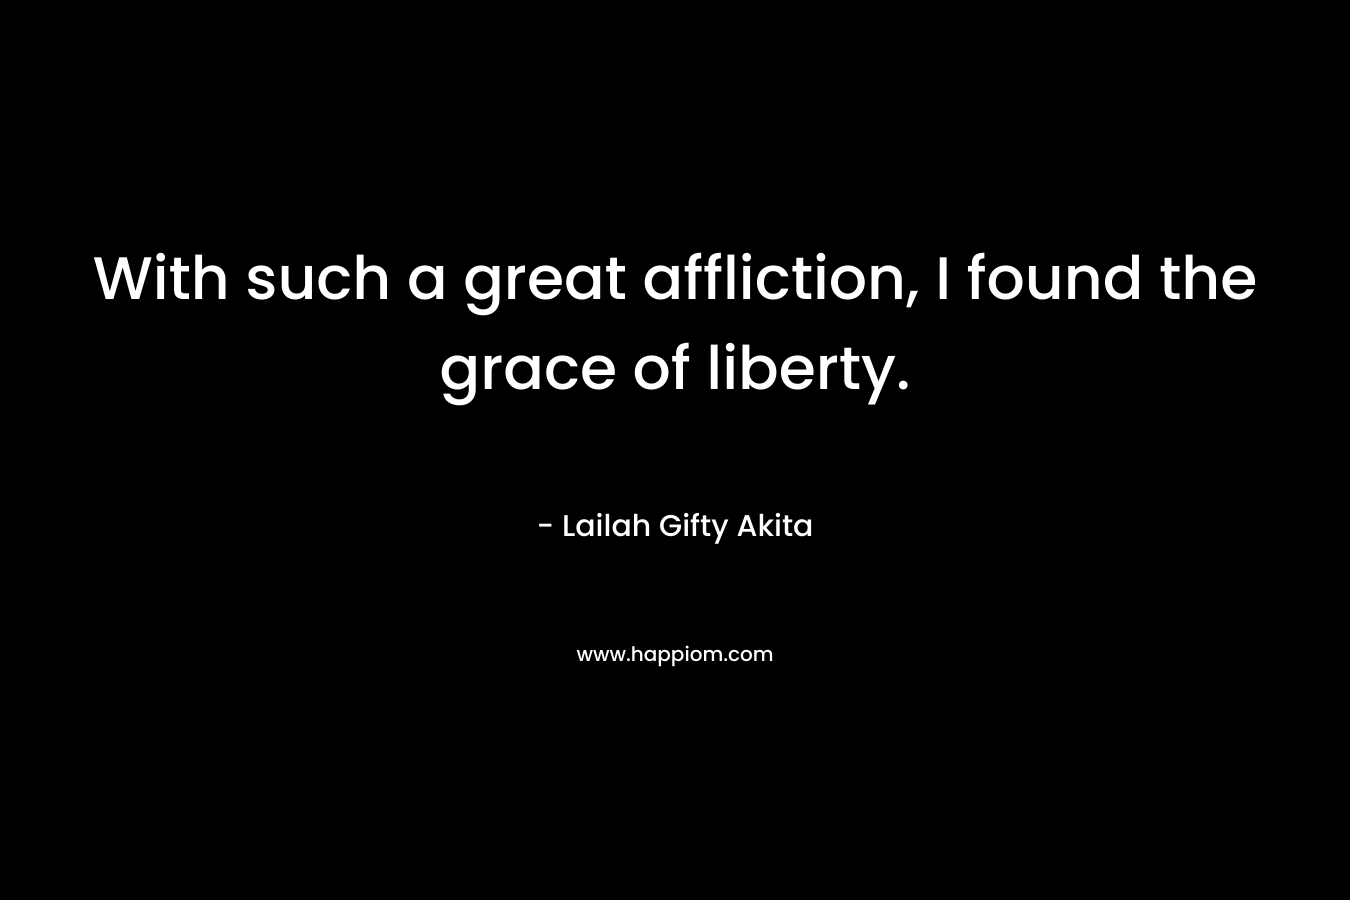 With such a great affliction, I found the grace of liberty.